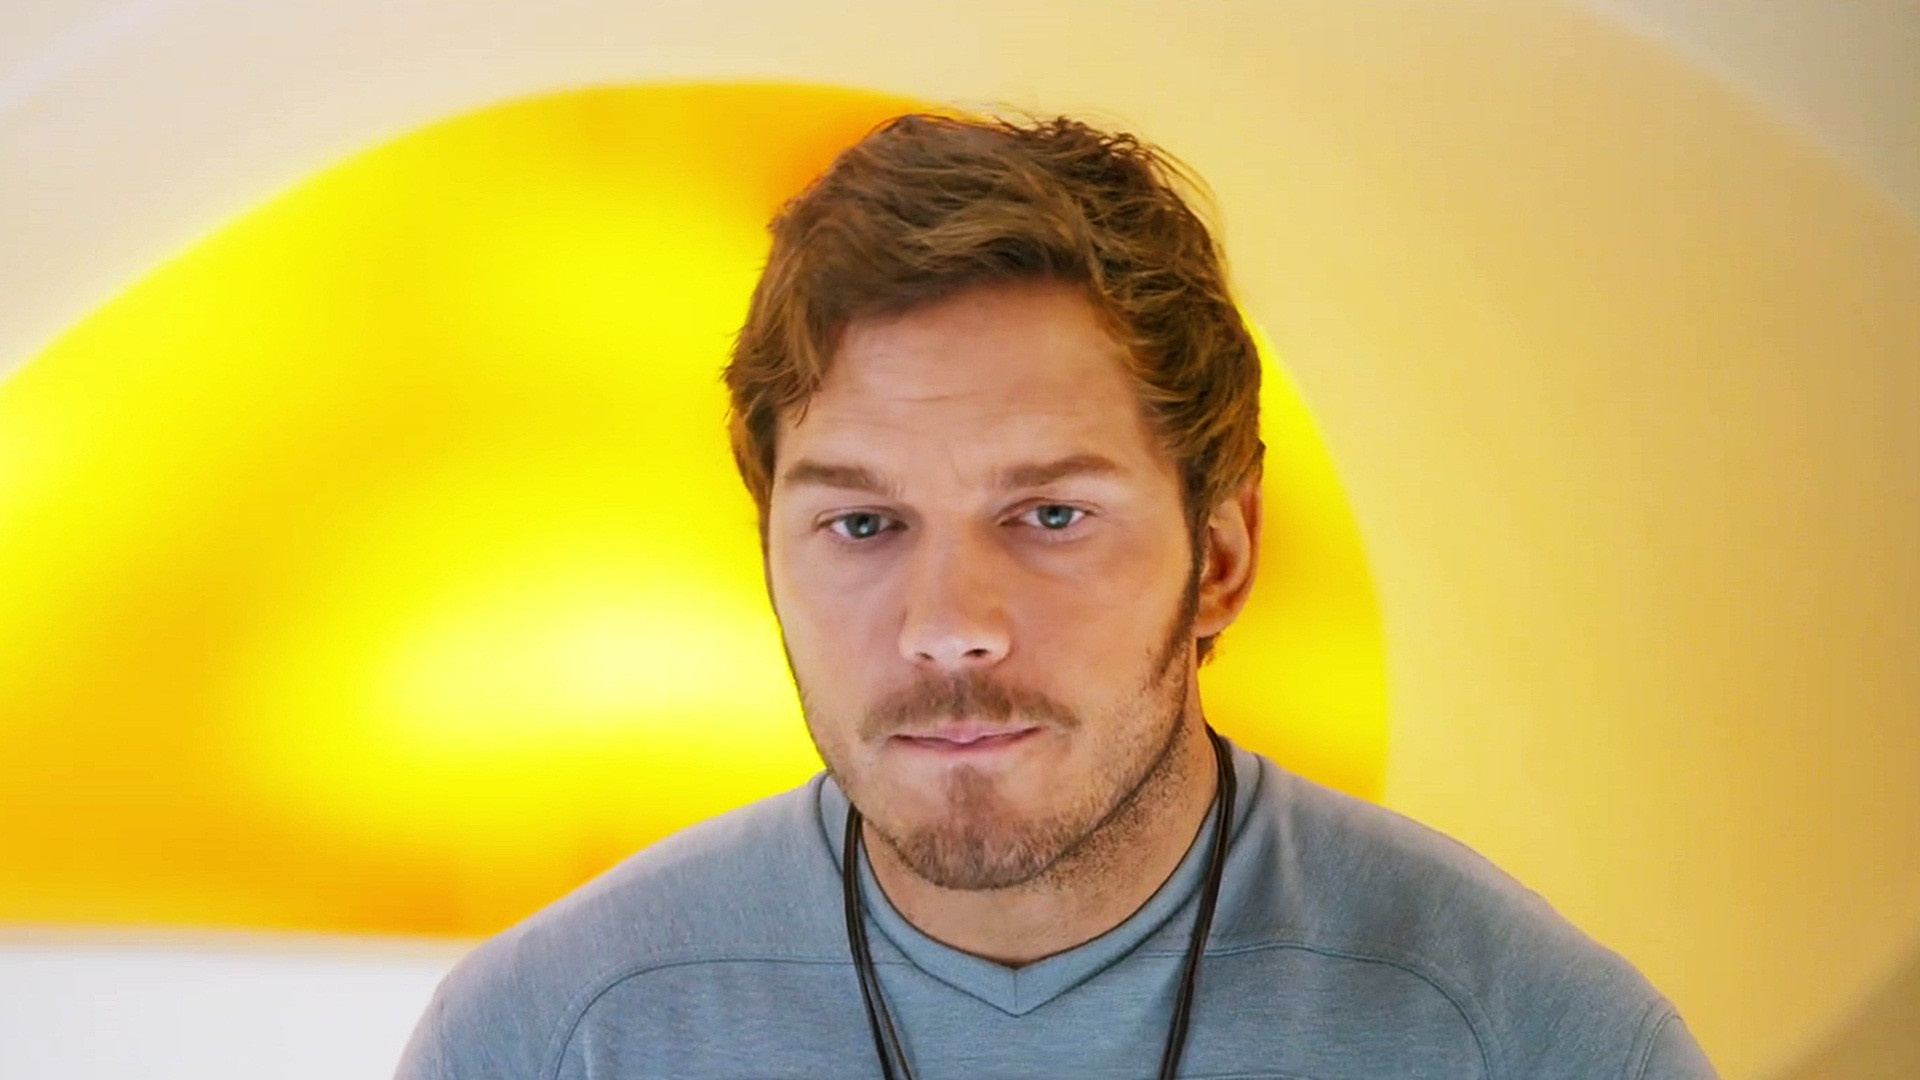 Chris Pratt: Known for the role in Guardians Of The Galaxy Vol. 2, Star Lord. 1920x1080 Full HD Wallpaper.